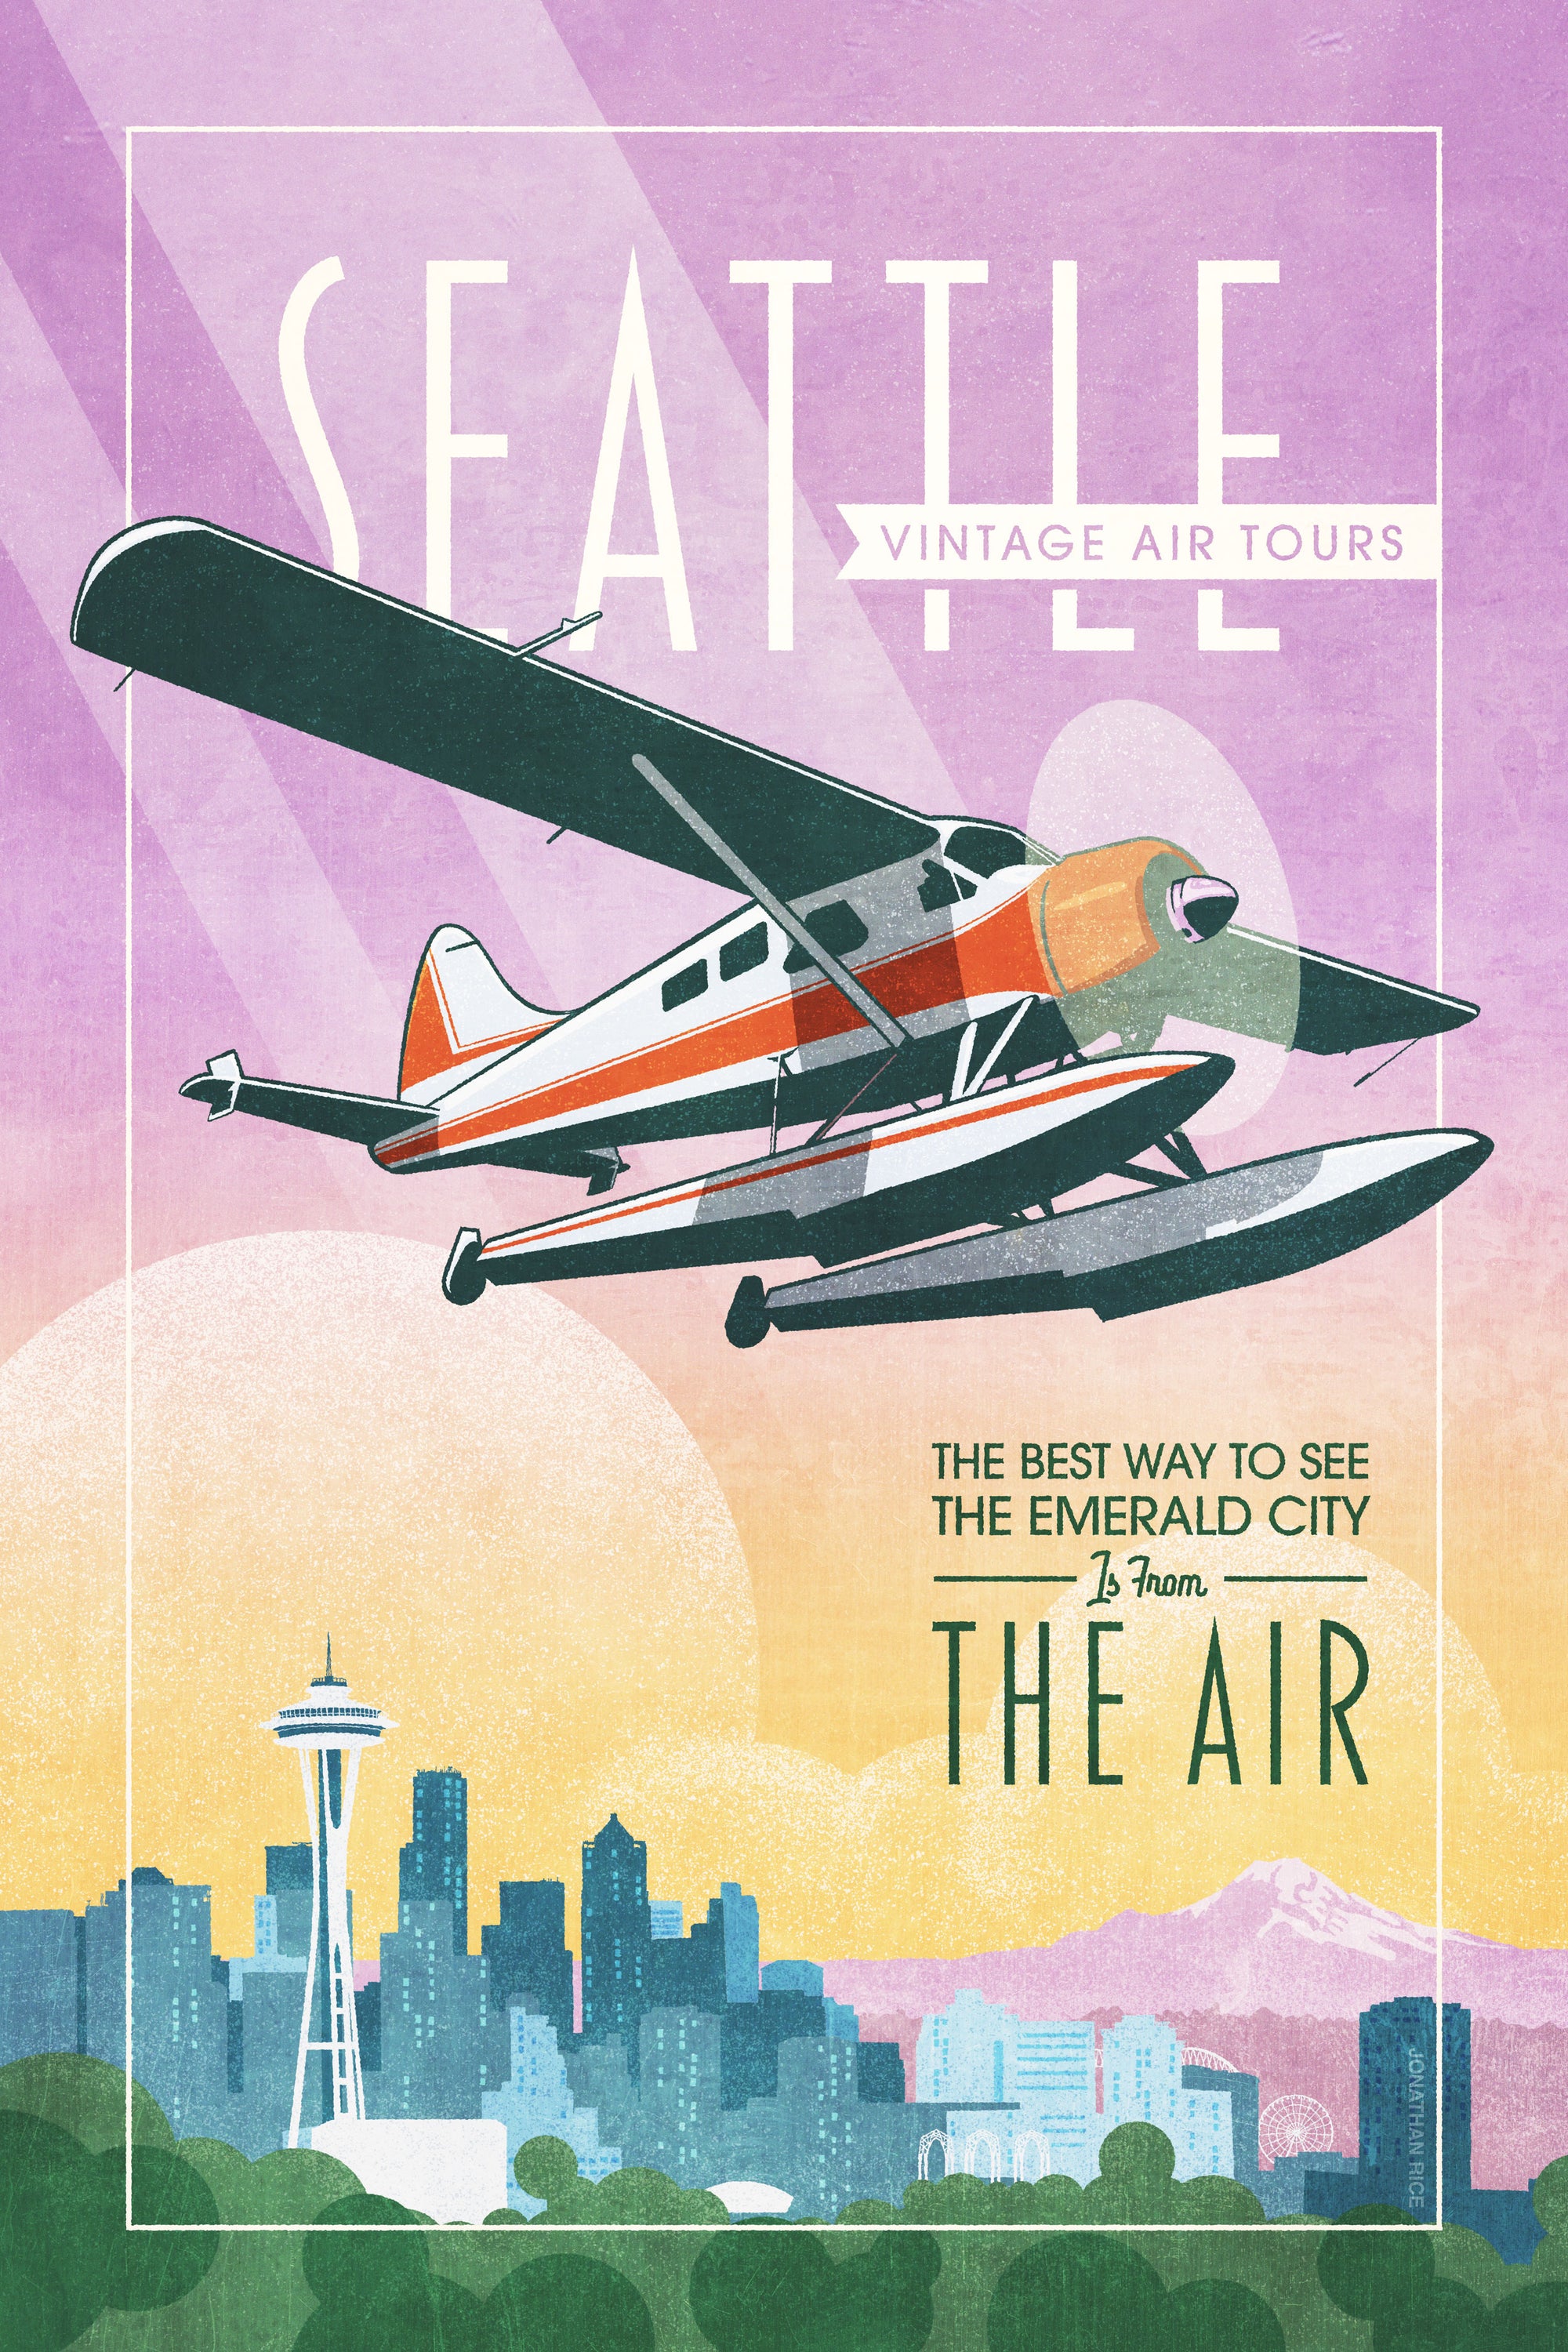 Retro style giclée art print of a De Havilland Canada DHC-2 Beaver floatplane flying over Seattle, Washington.. It has the words “Seattle Vintage Air Tours” at the top. The print’s soft purples, yellows, blues and greens create a stunning backdrop for the classic floatplane with it’s touch of red. There are additional words a the bottom that says “The best way to see the Emerald City is from the air.”